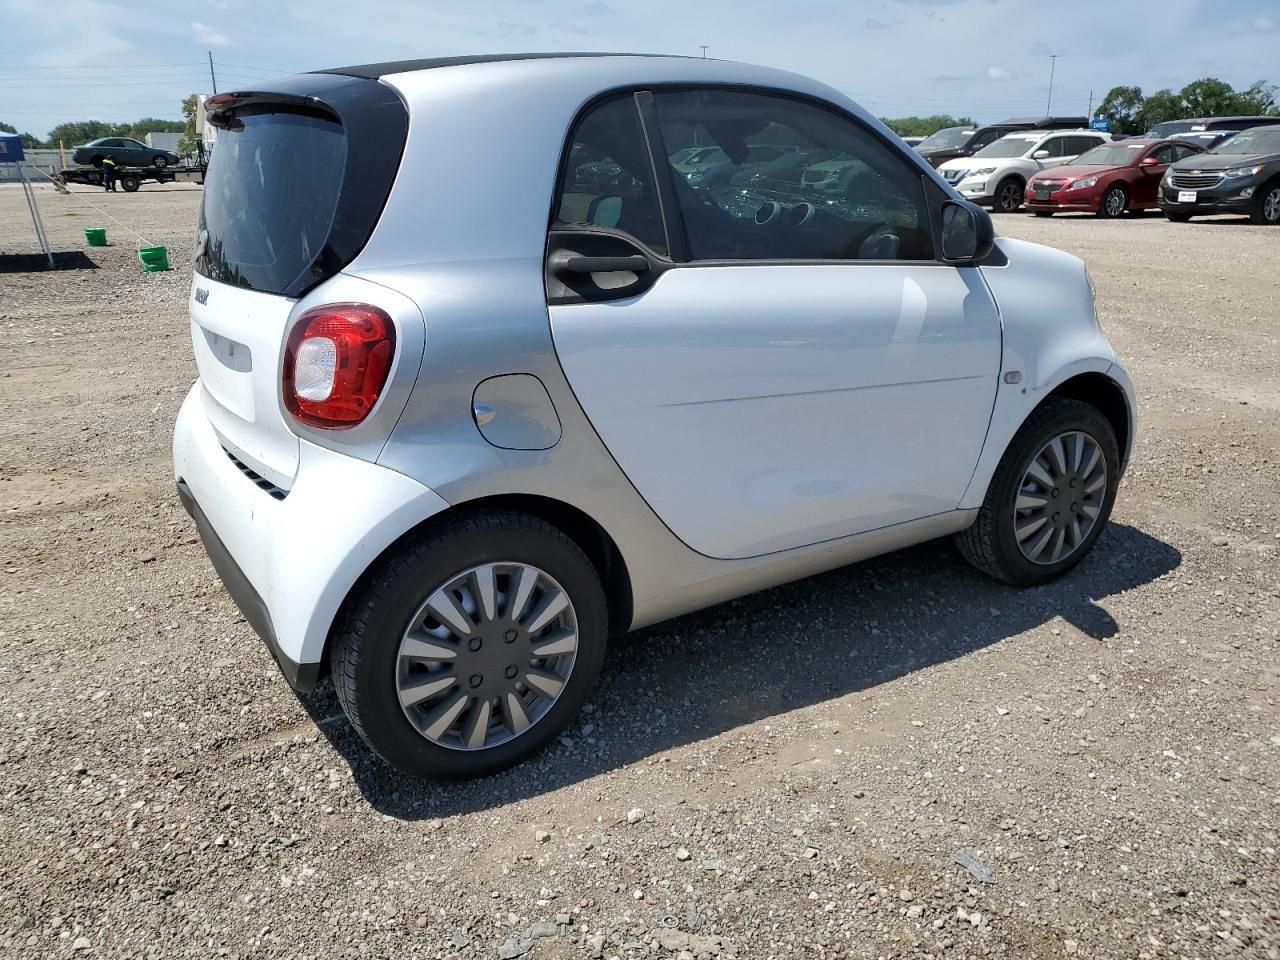 2017 Smart Fortwo For Sale in Des Moines, IA. Lot #60026***